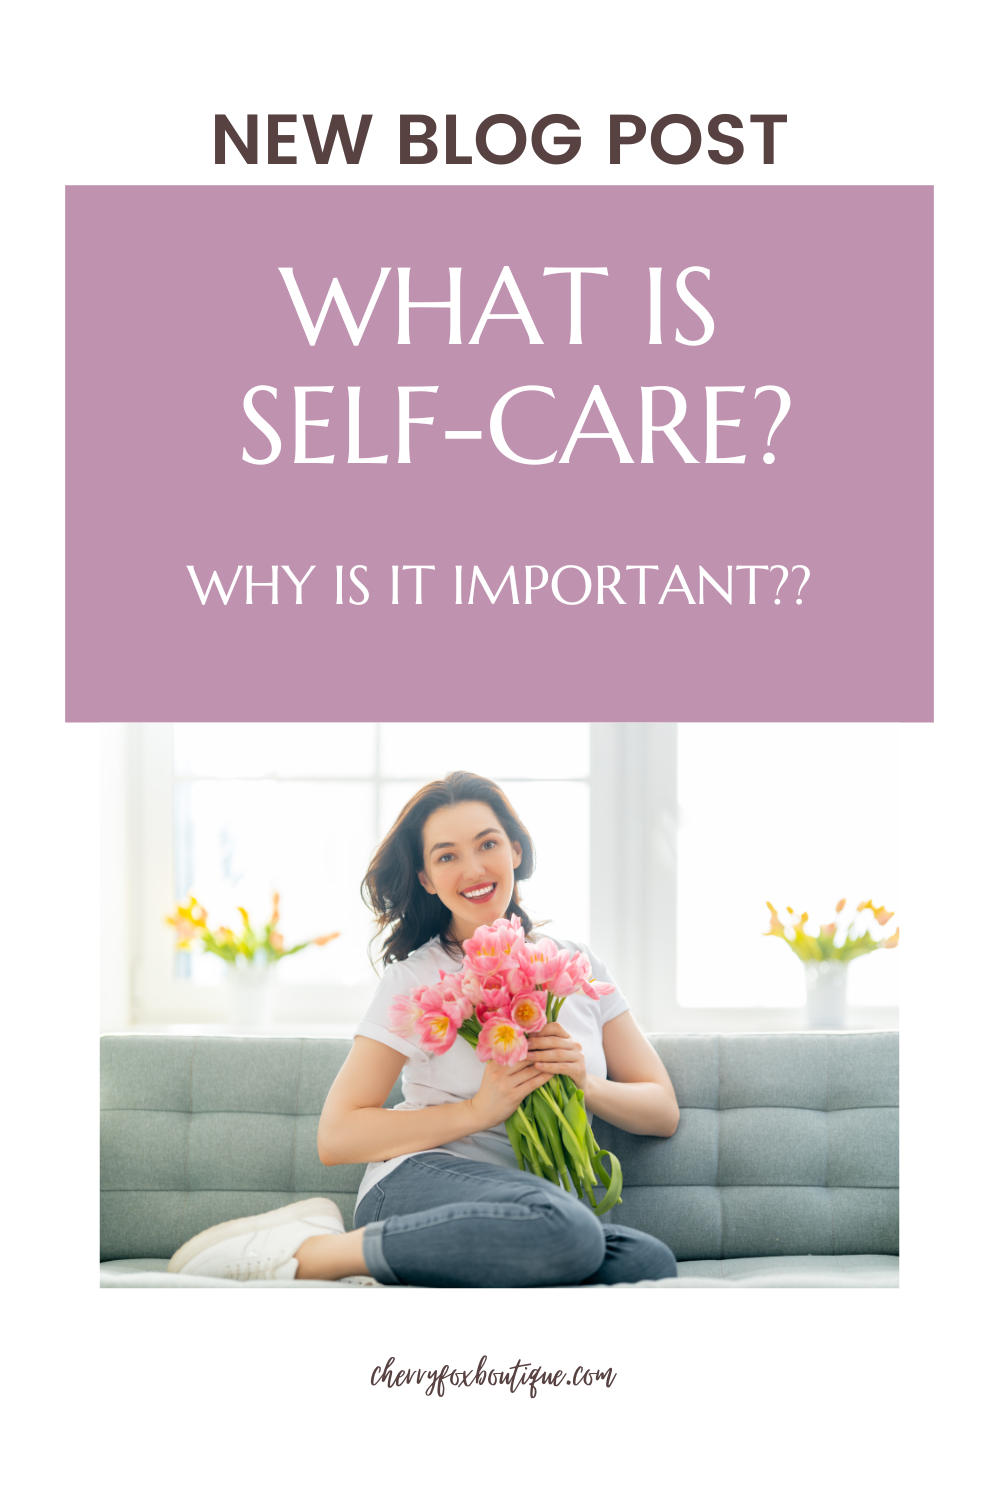 Self-Care: What it Means and Why It's Important